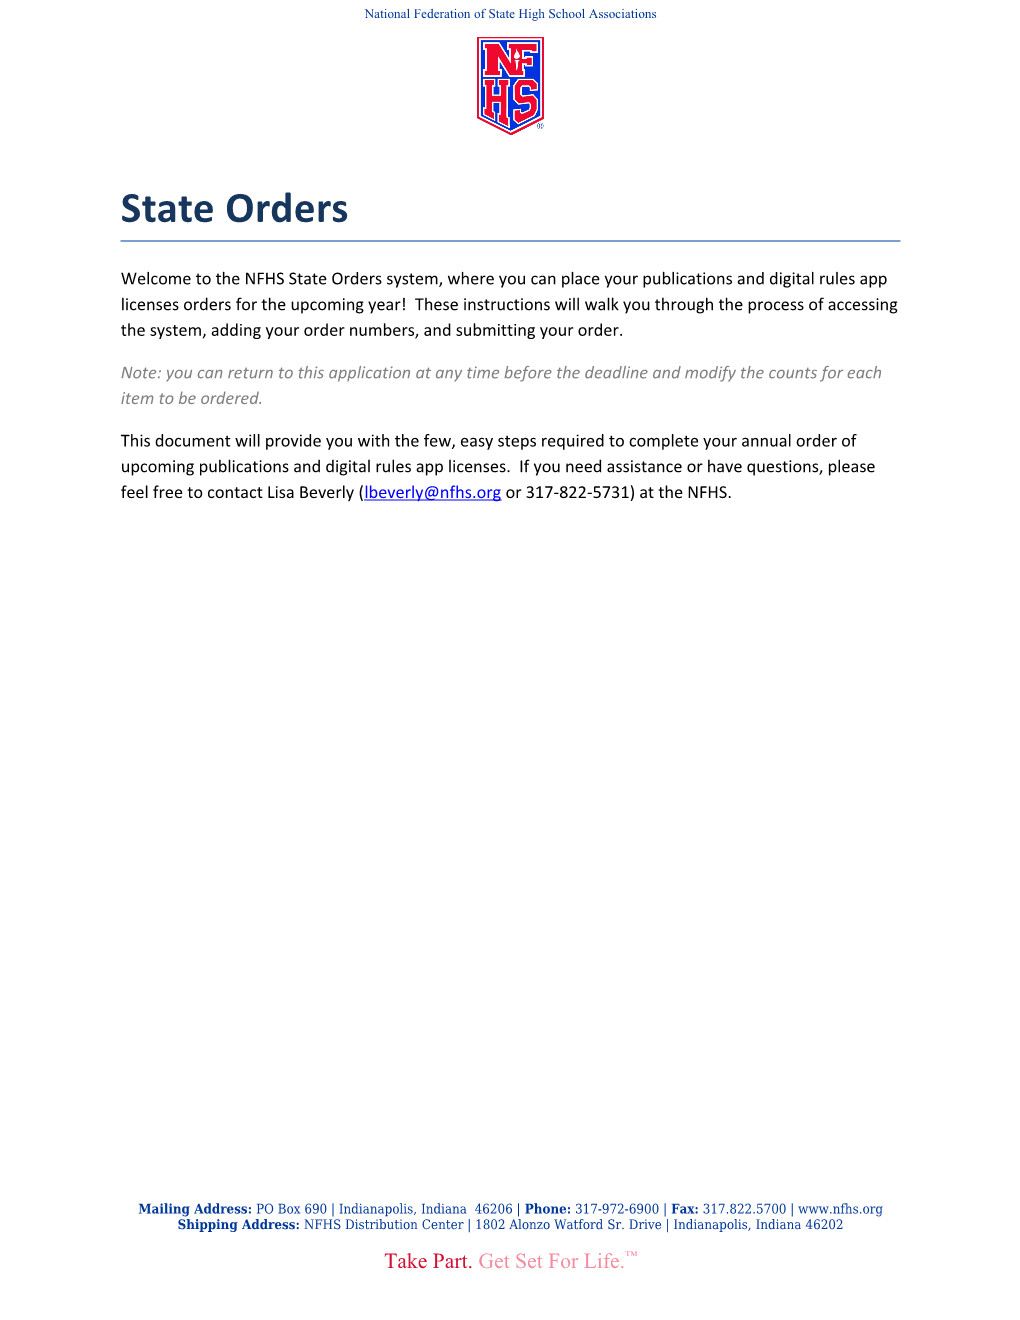 Welcome to the NFHS State Orders System, Where You Can Place Your Publications and Digital